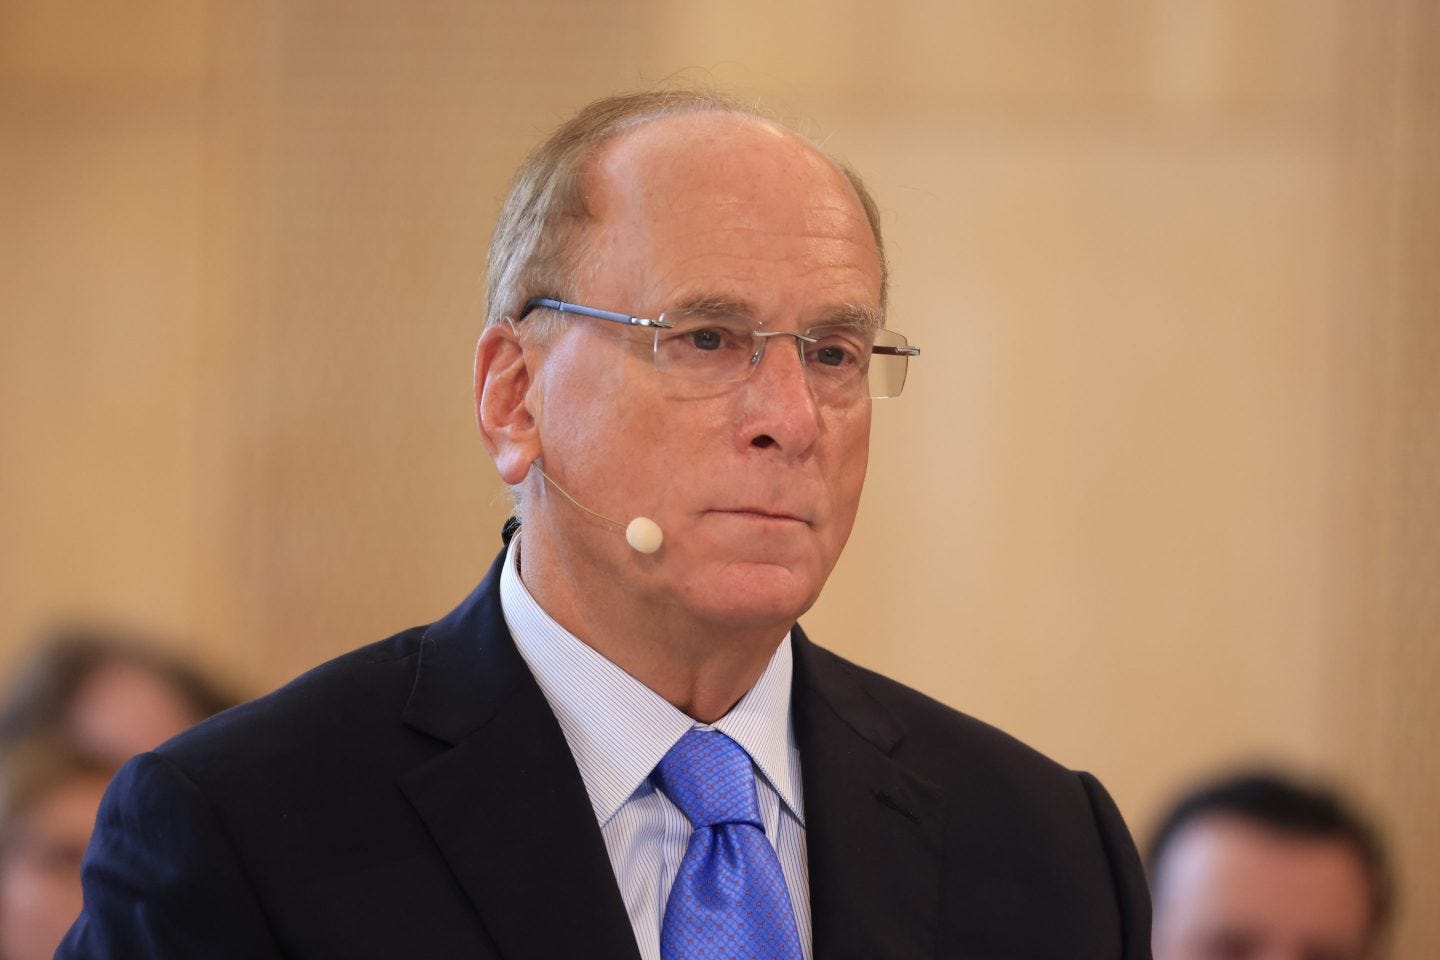 Larry Fink, chief executive officer of Blackrock Inc., at the Berlin Global Dialogue in Berlin on Sept. 29, 2023.